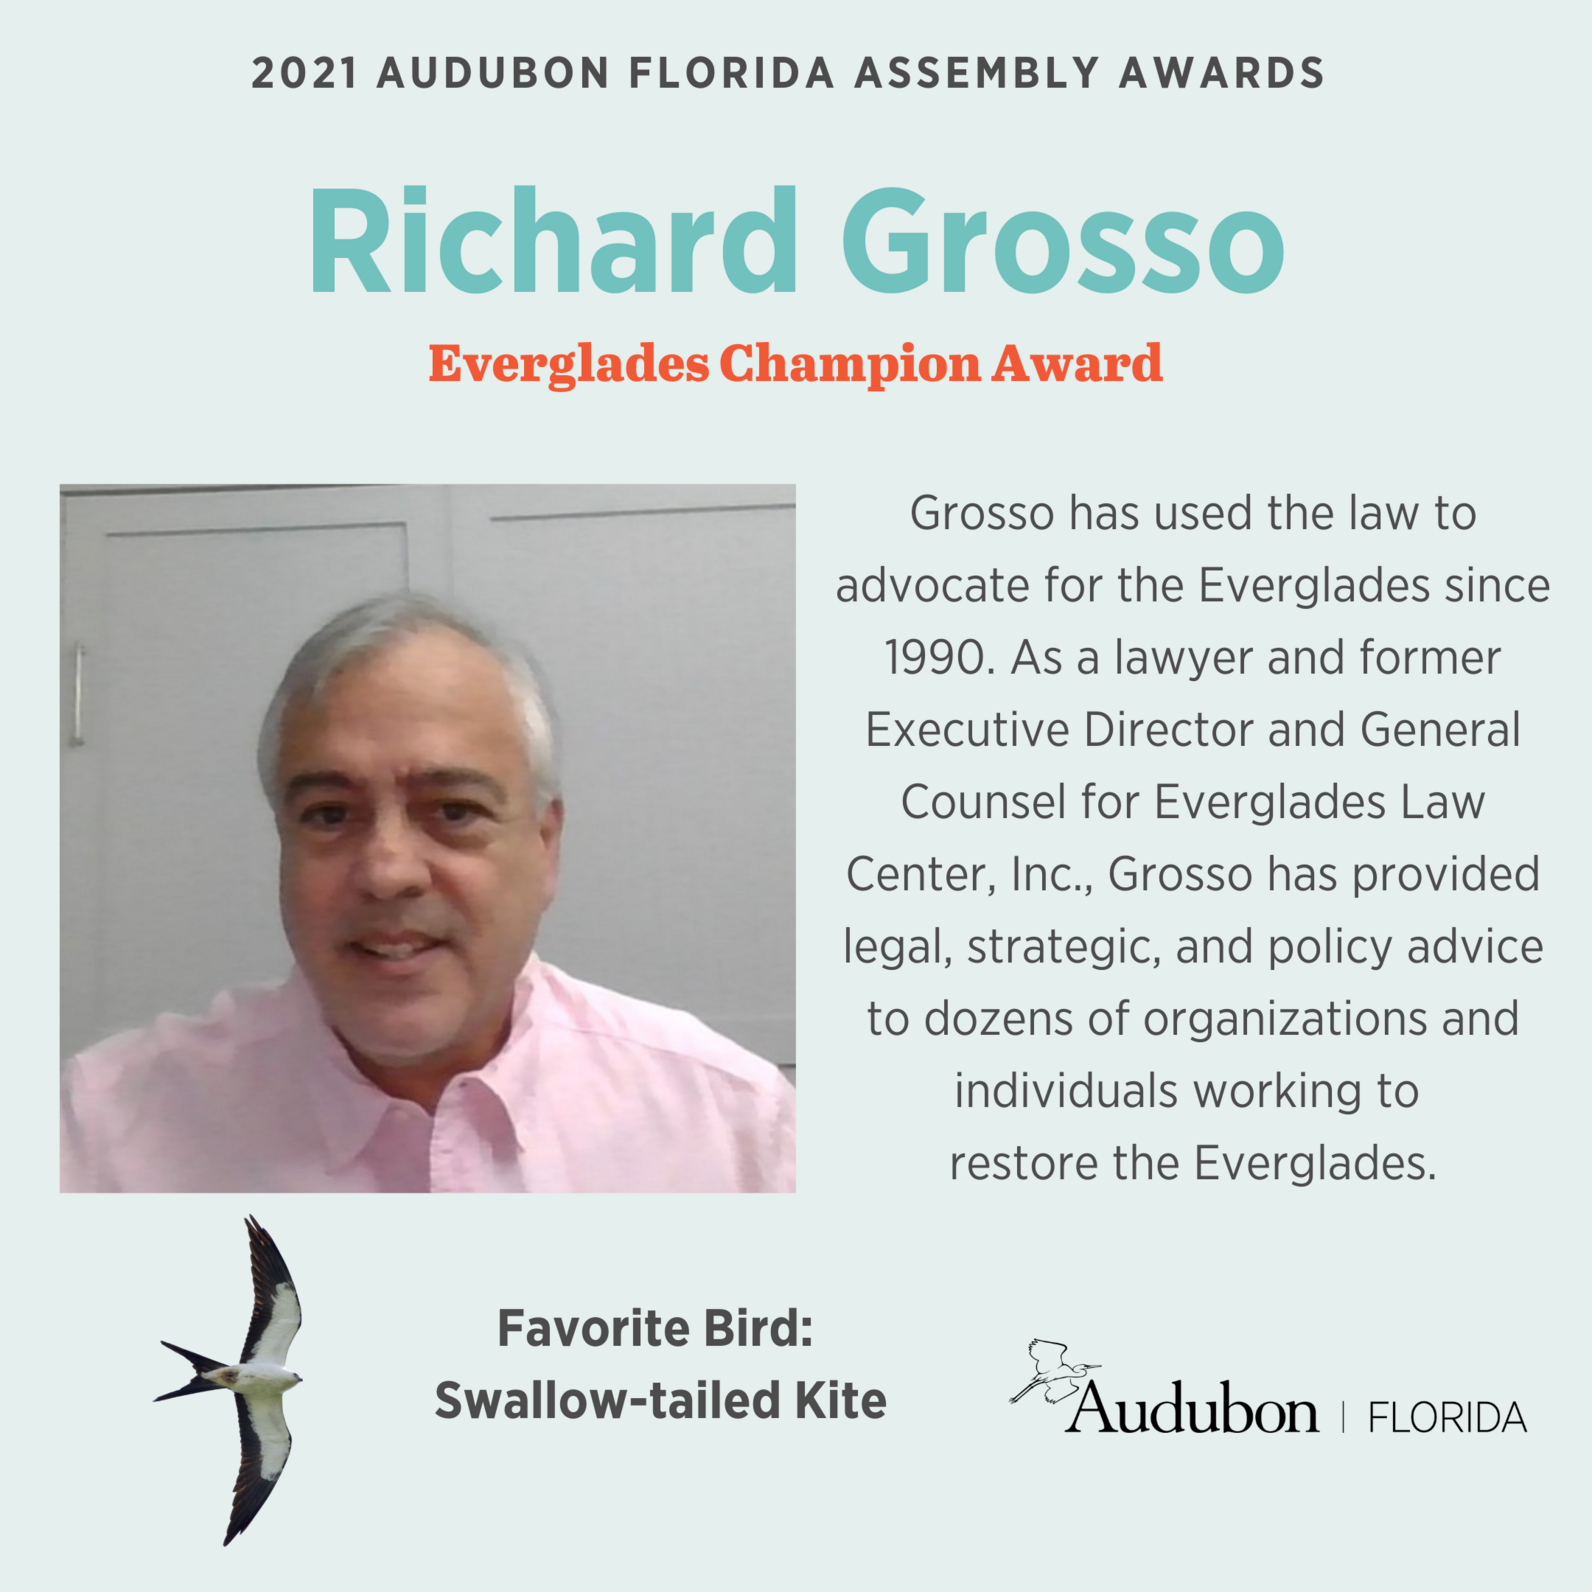 Graphic of Richard Grosso, with his favorite bird - a Swallow-tailed Kite - and repeated language from the article about why he won the award.